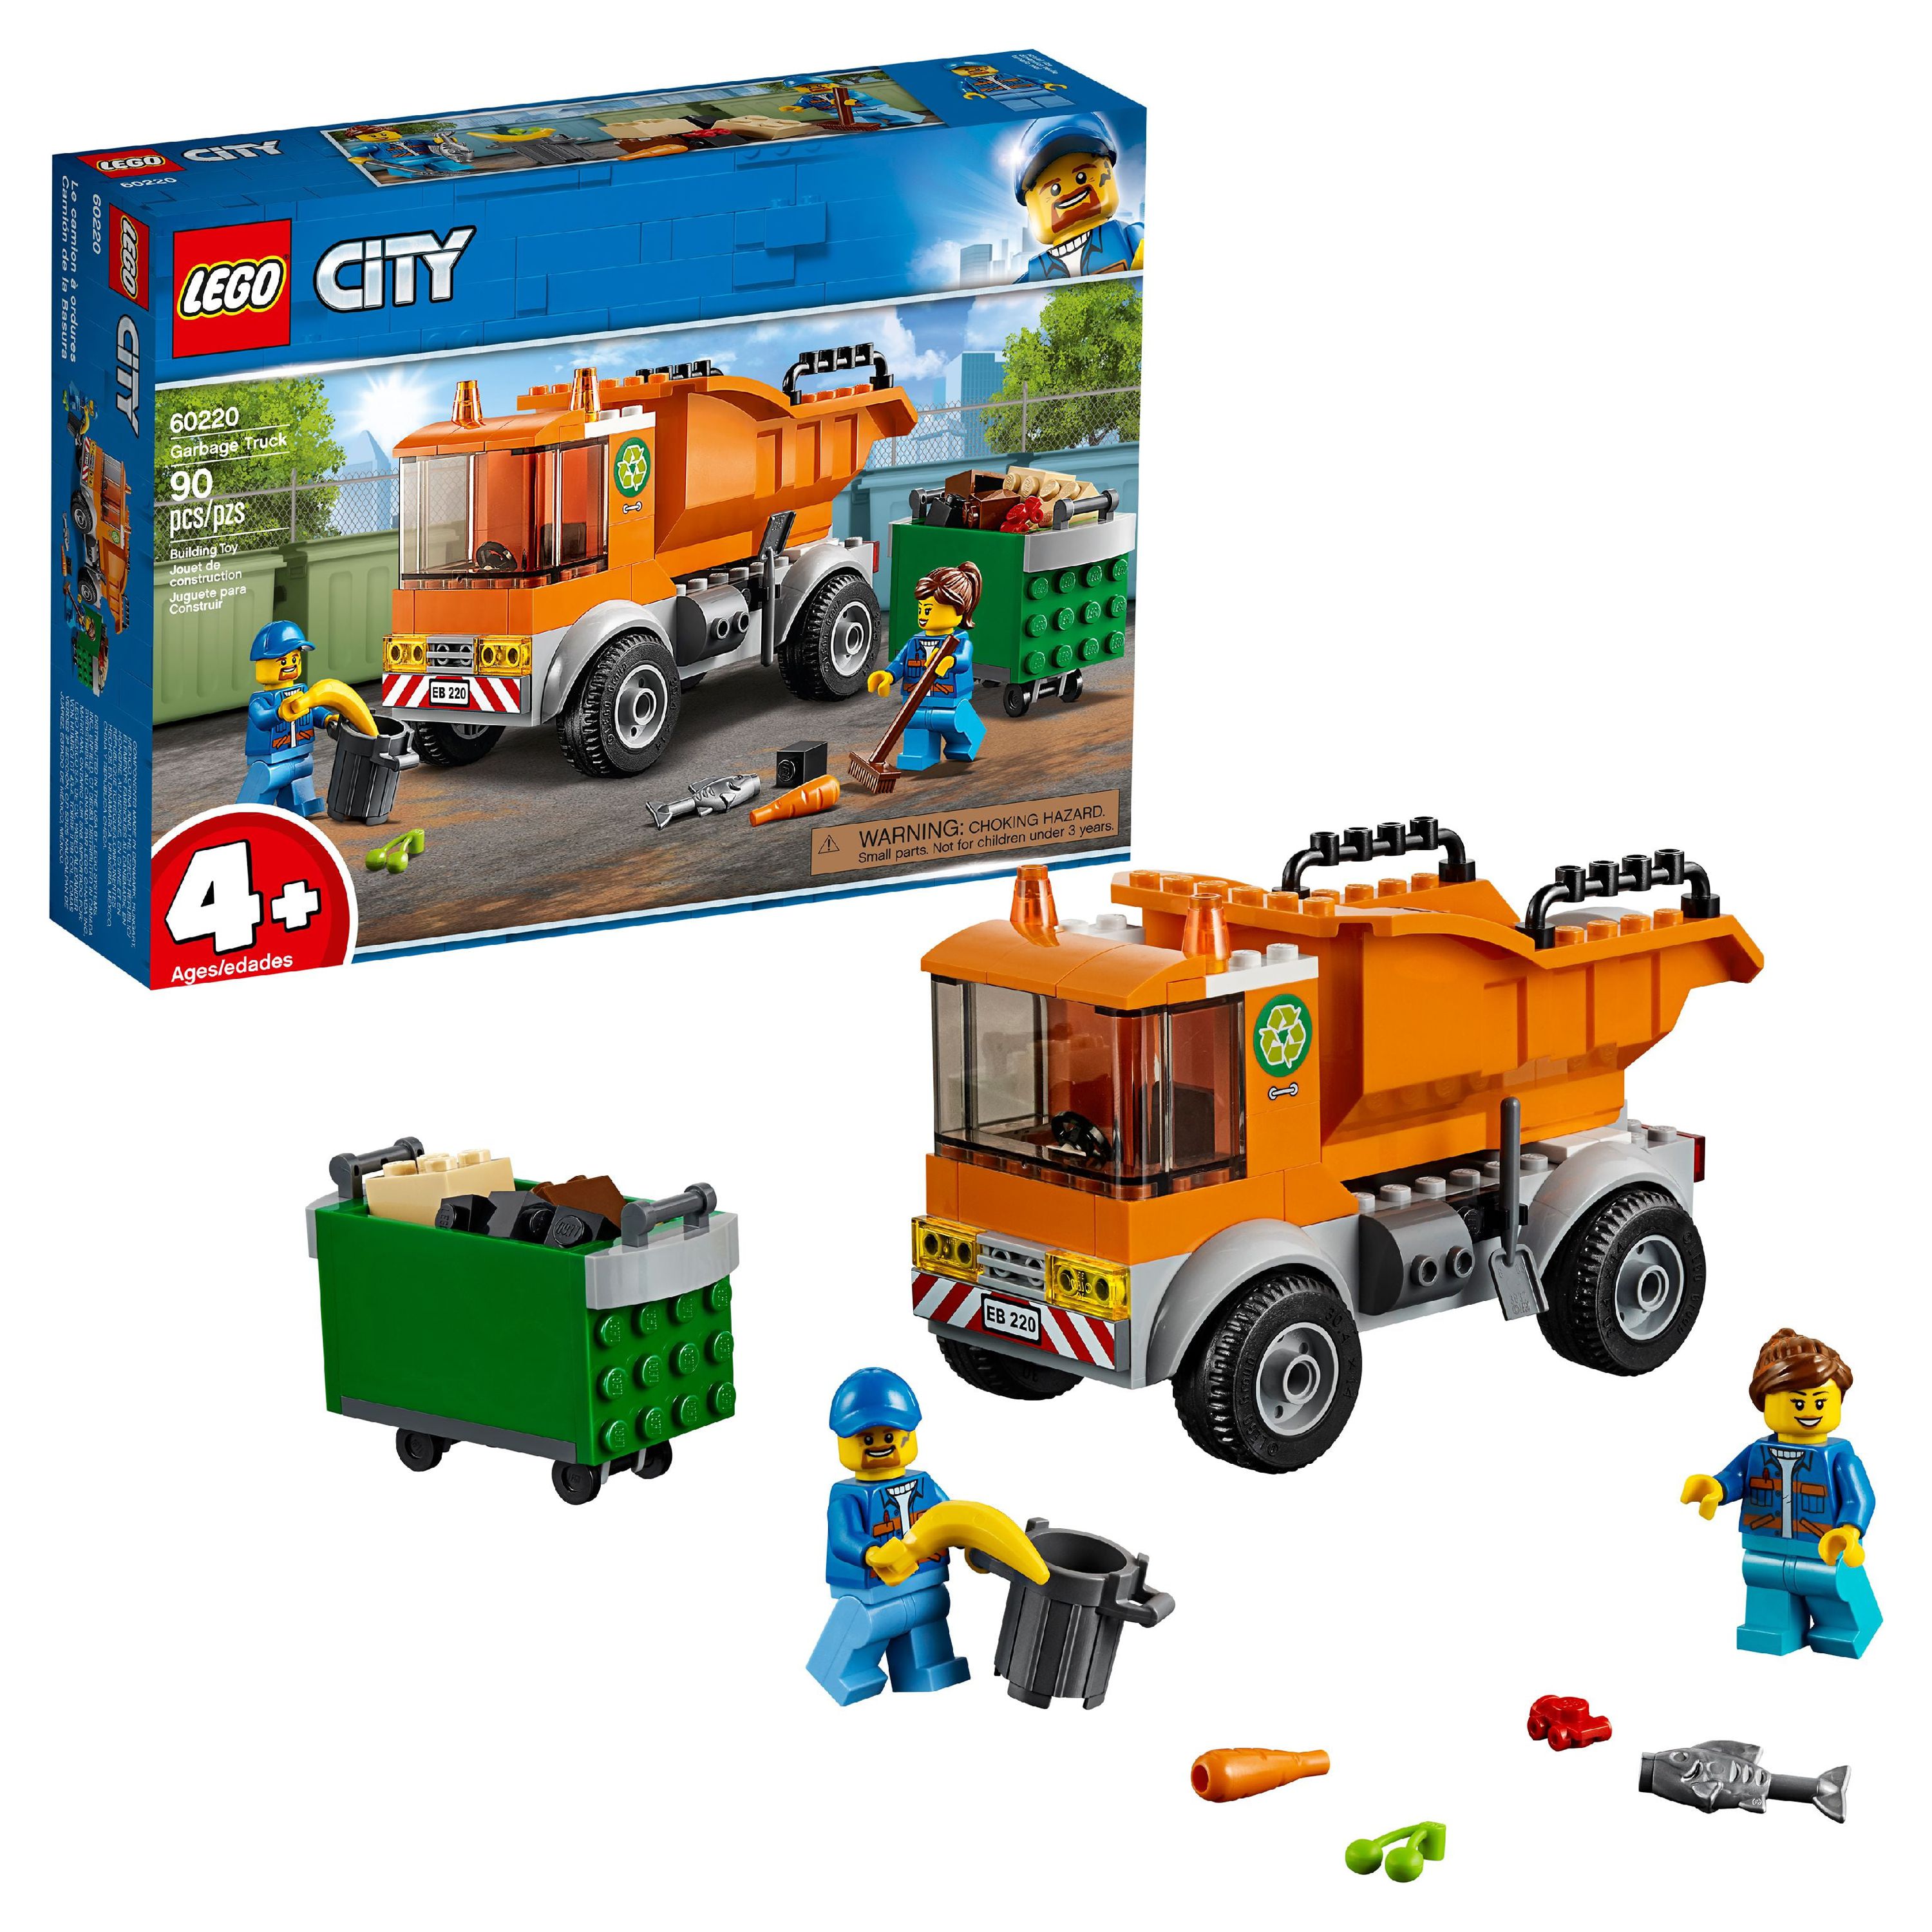 LEGO City Great Vehicles Garbage Truck 60220 - image 1 of 8